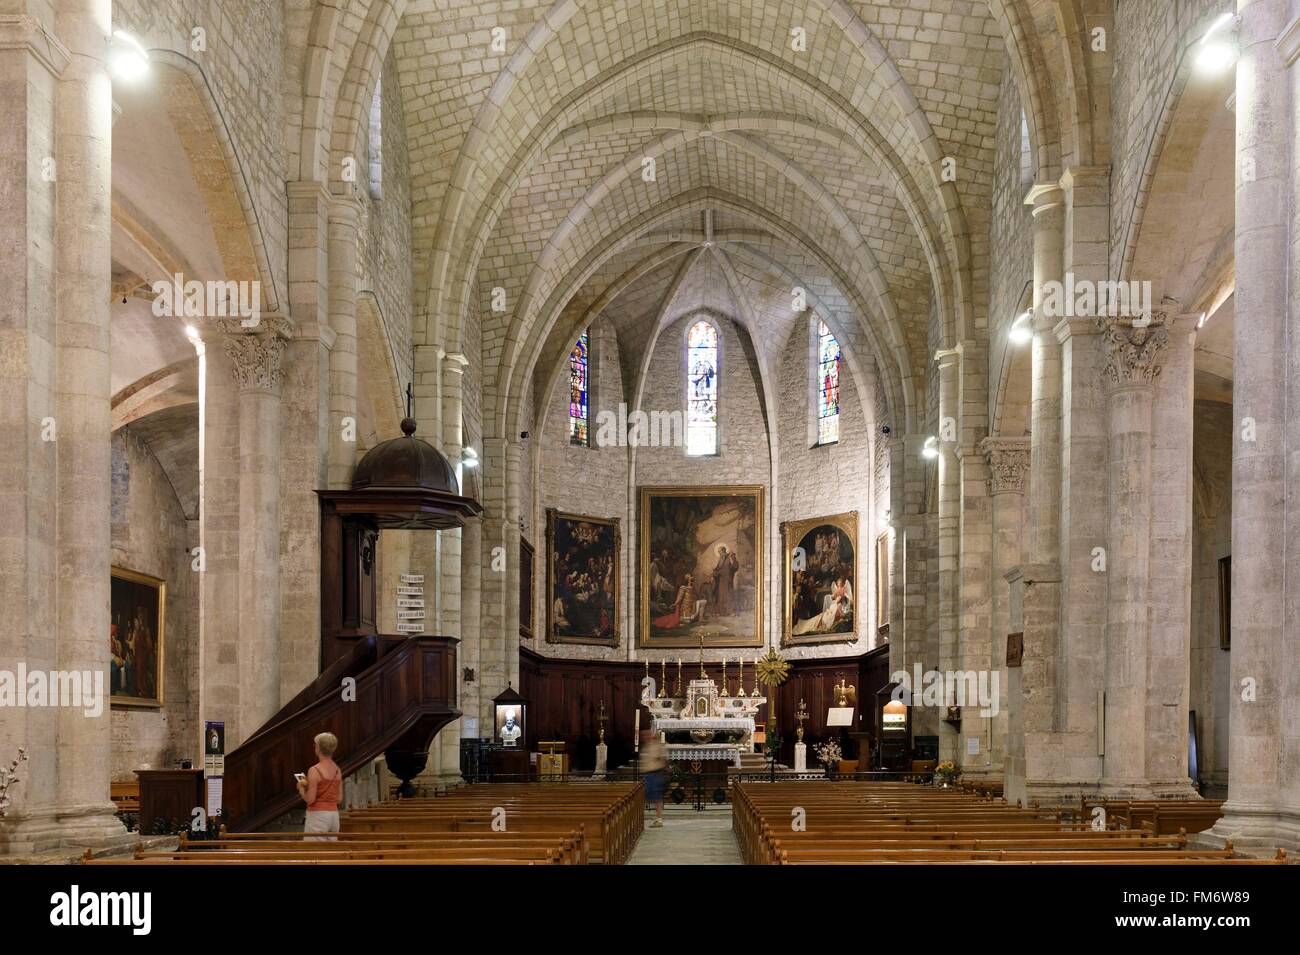 France, Gard, Saint Gilles, 12th-13th century abbey, listed as World Heritage by UNESCO under the road to St Jacques de Compostela in France, Provencal Romanesque style Stock Photo